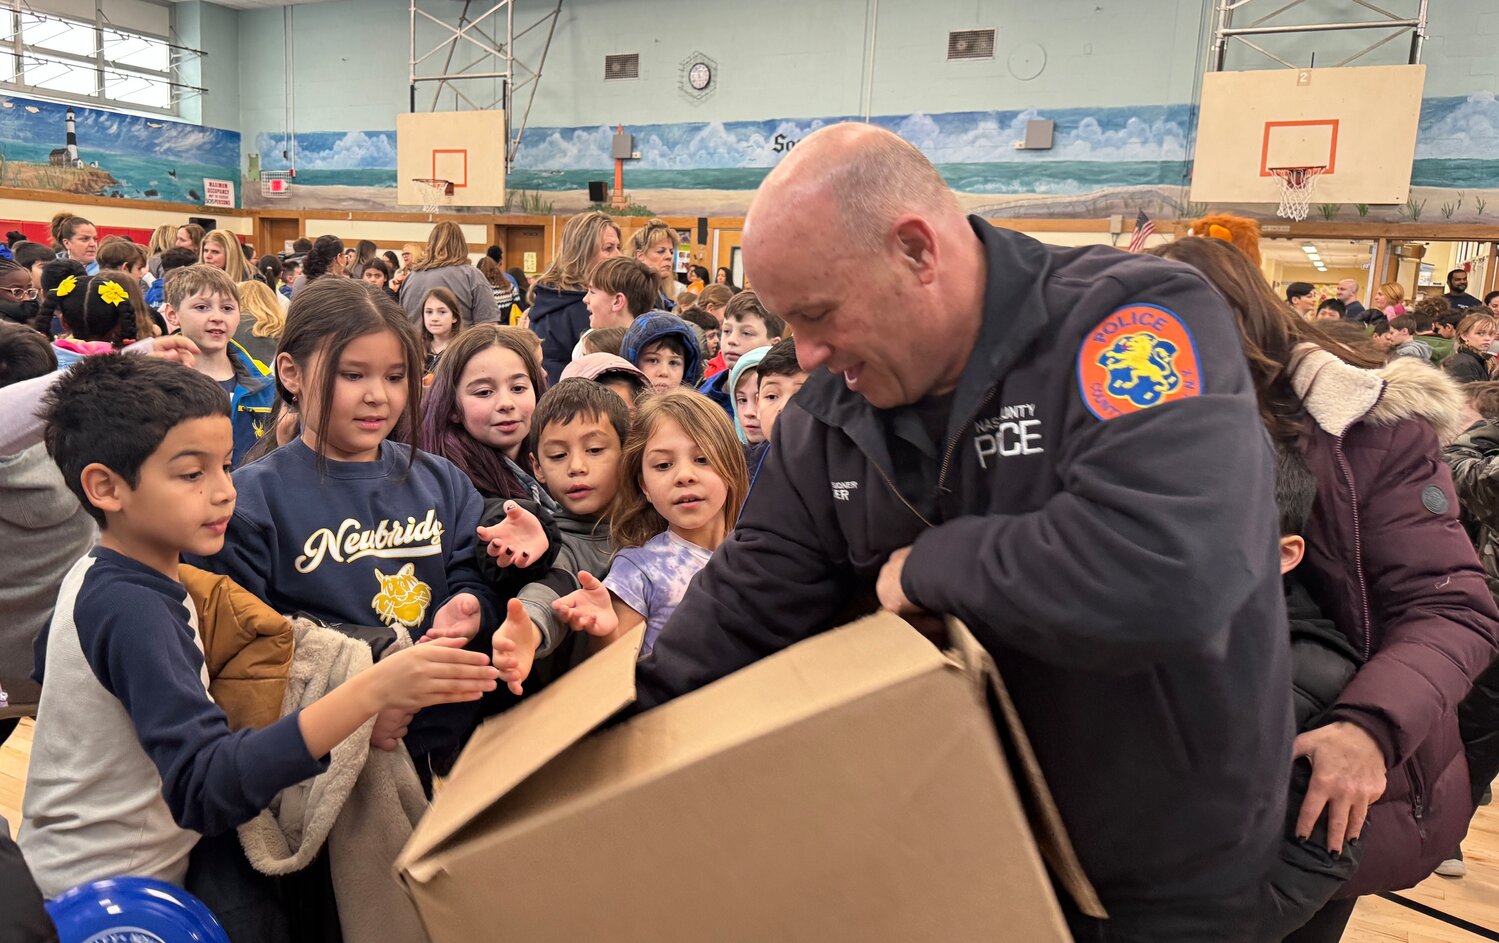 Newbridge Road Elementary School was a victim of a swatting incident last week. The Nassau County Police Department quickly showed up to the scene to ensure the safety of everyone. To thank the school for its actions during the incident, Police Commissioner Patrick Ryder held on Jan. 19, meeting hundreds of students who were impacted.